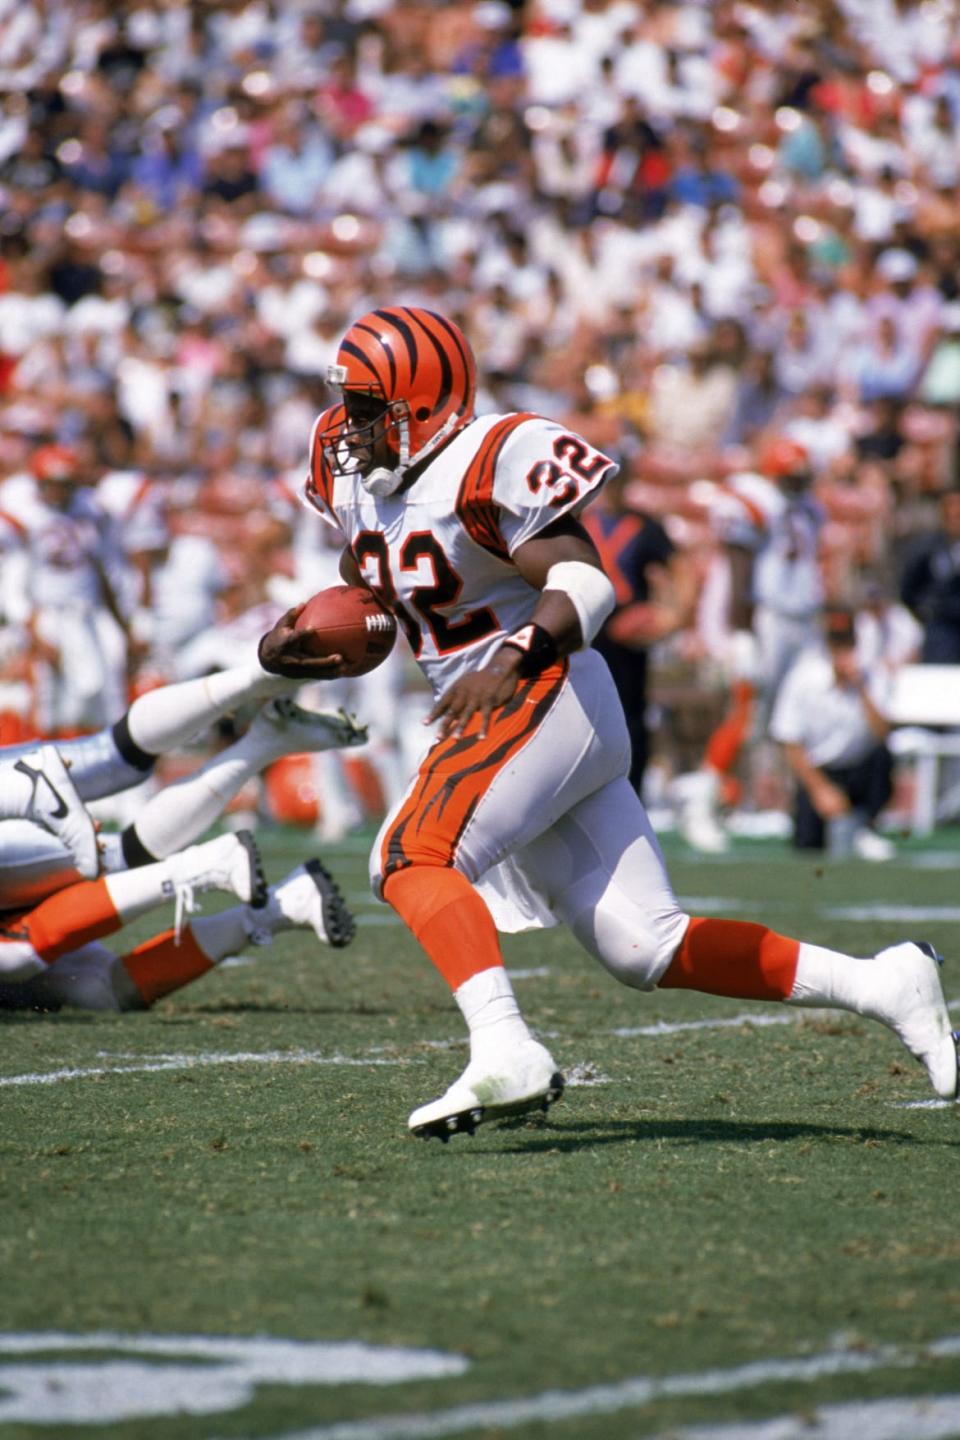 <div class="inline-image__caption"><p>Running Back Stanley Wilson Sr. #32 of the Cincinnati Bengals runs with the ball against the Los Angeles Raiders at Los Angeles Memorial Coliseum on Oct. 2, 1988, in Los Angeles, California. </p></div> <div class="inline-image__credit">Bernstein Associates/Getty Images</div>